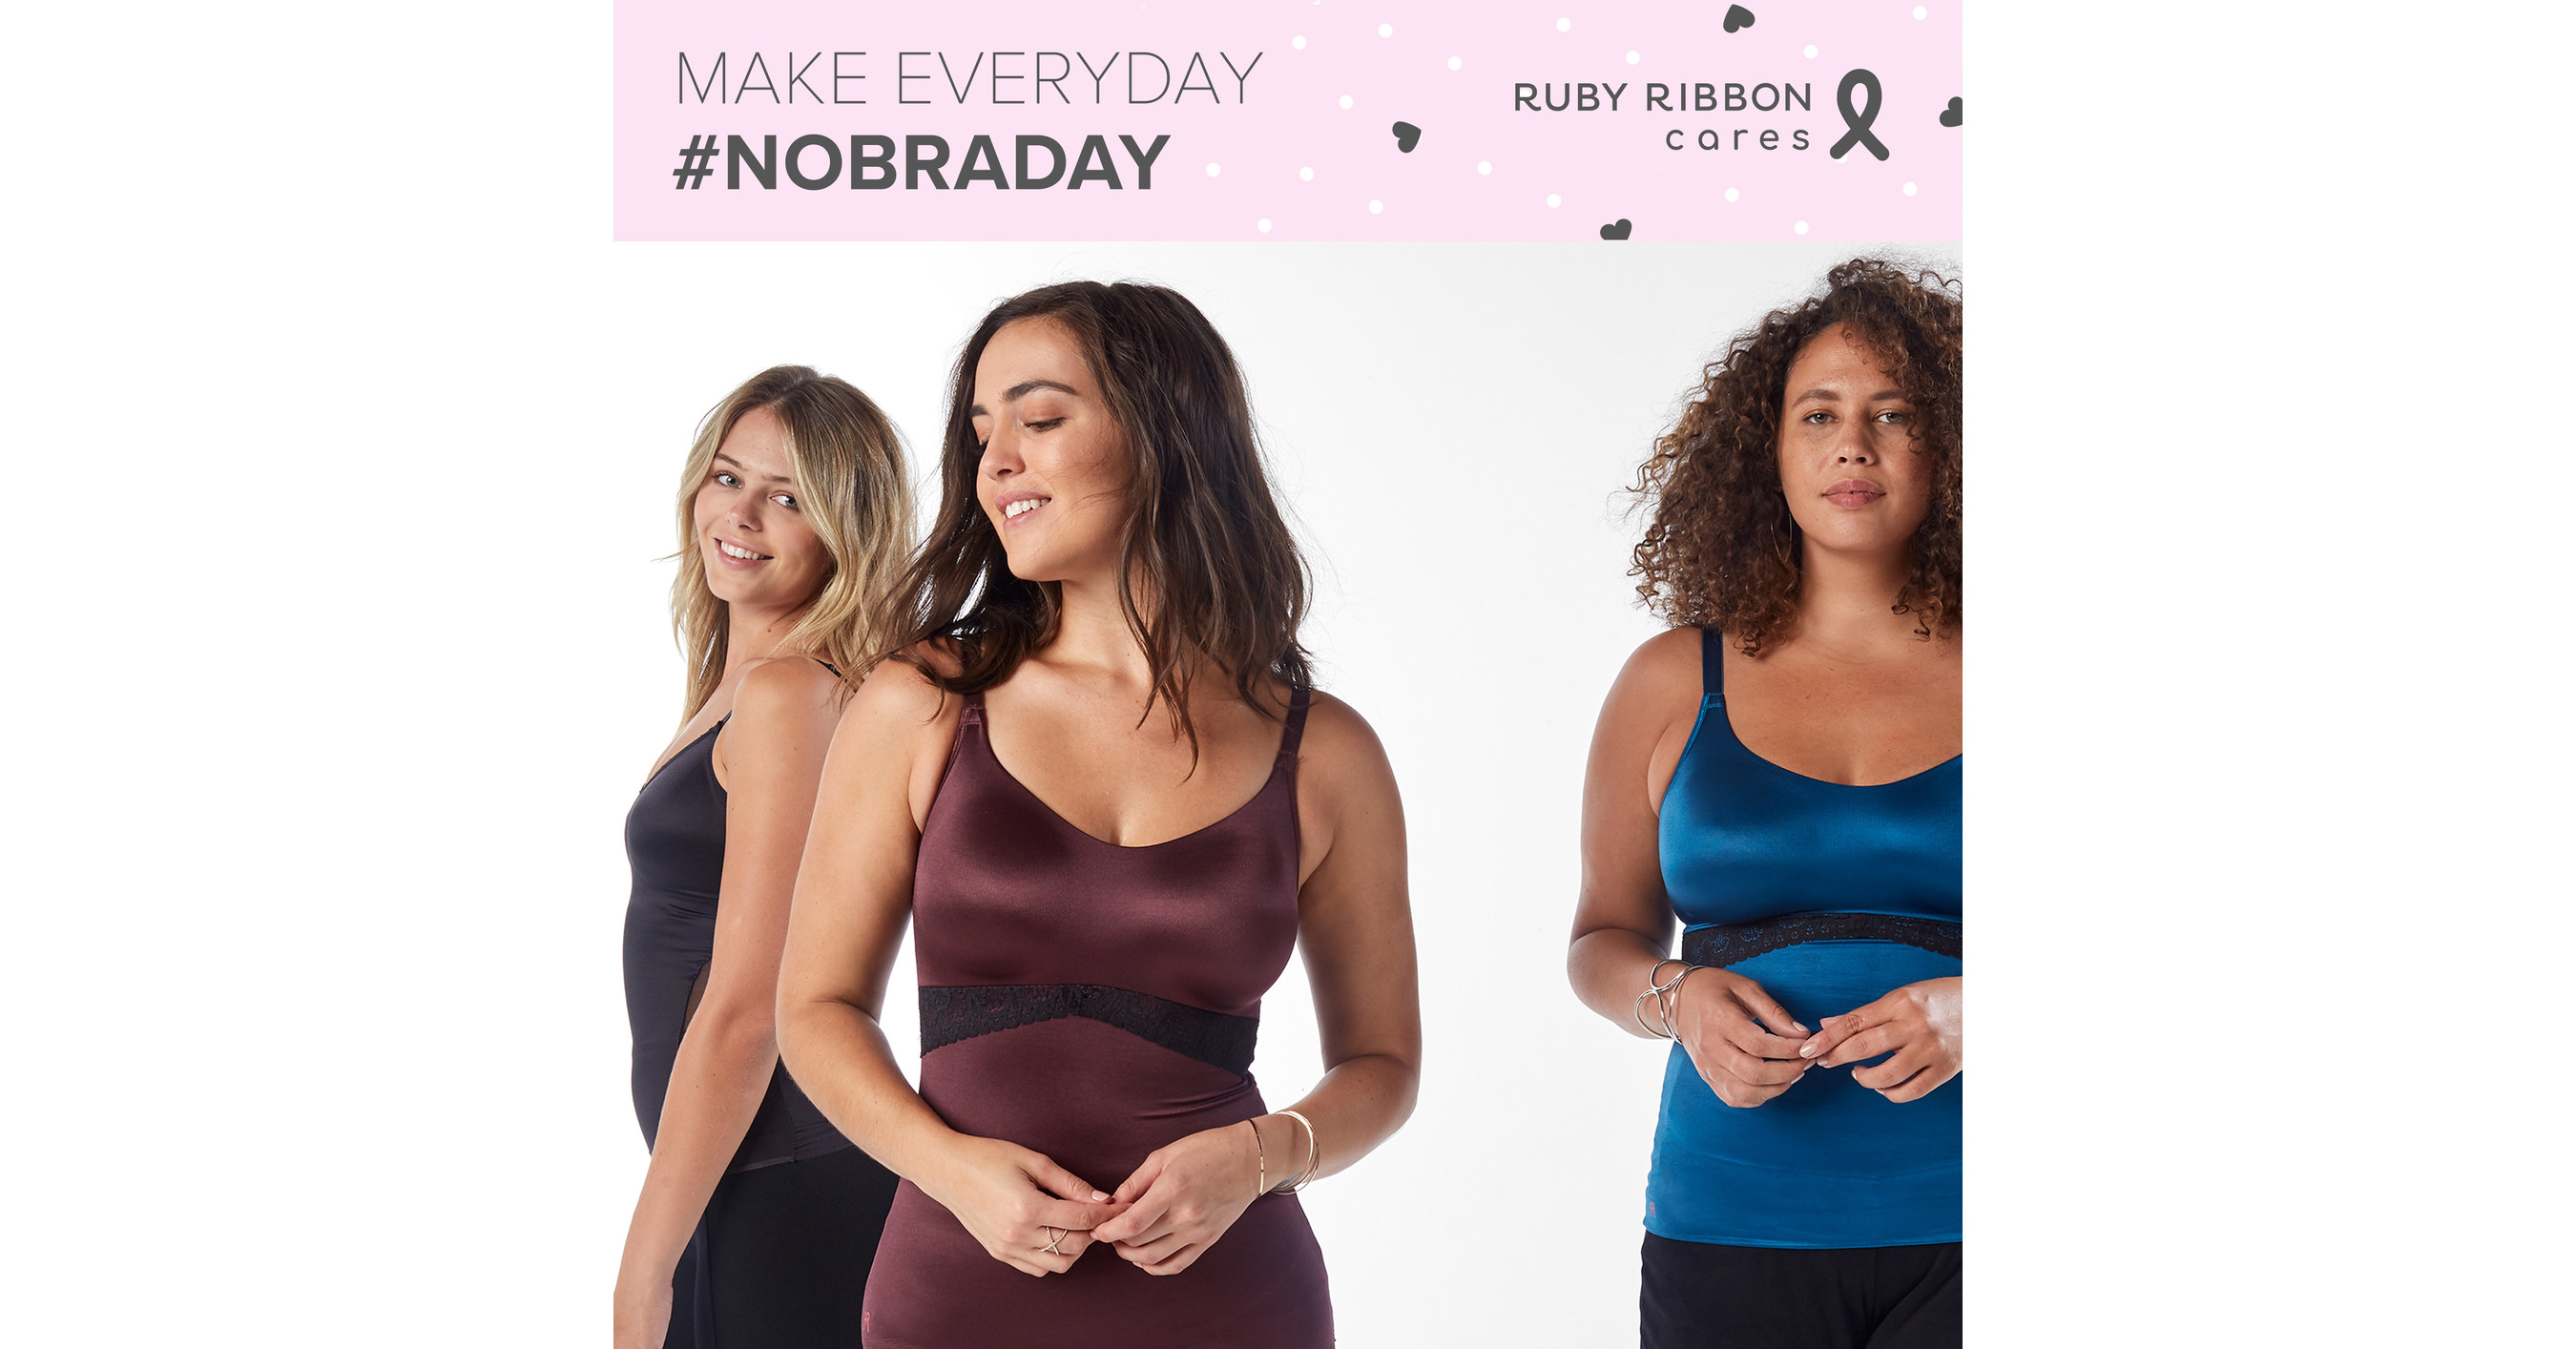 Best results and care for Ruby Ribbon Camis 